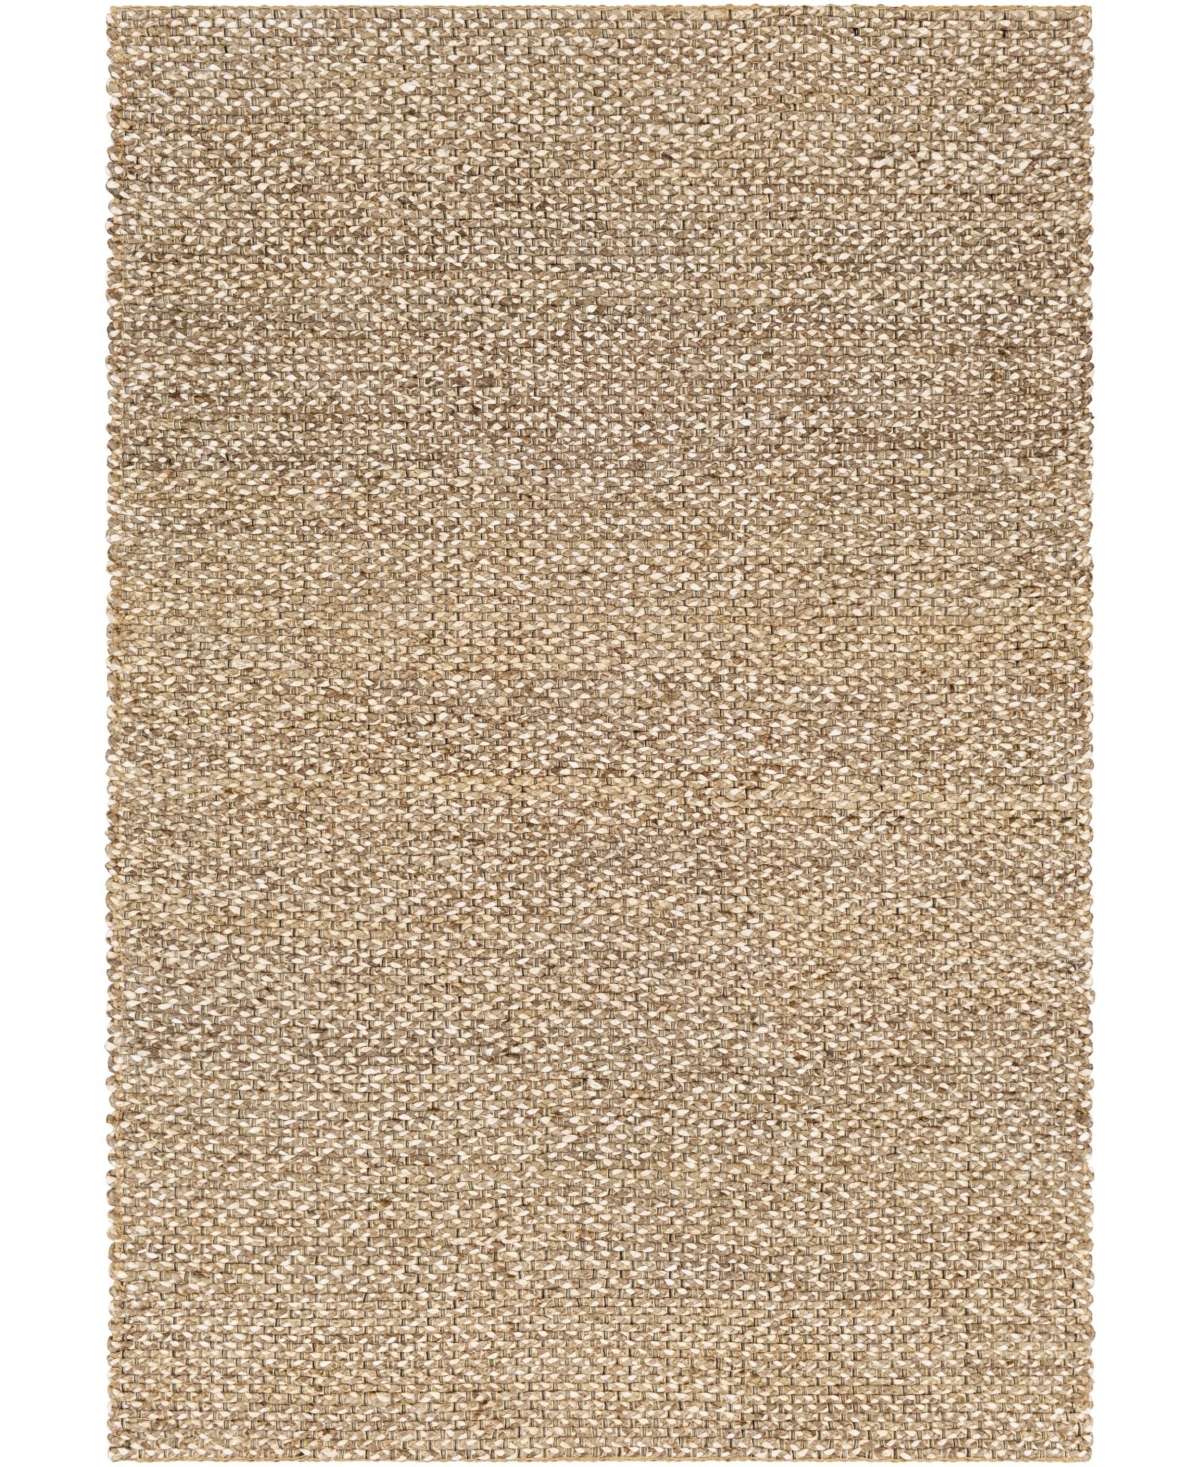 Surya Curacao Cur-2301 Taupe 5' x 7'6in Area Rug - Taupe